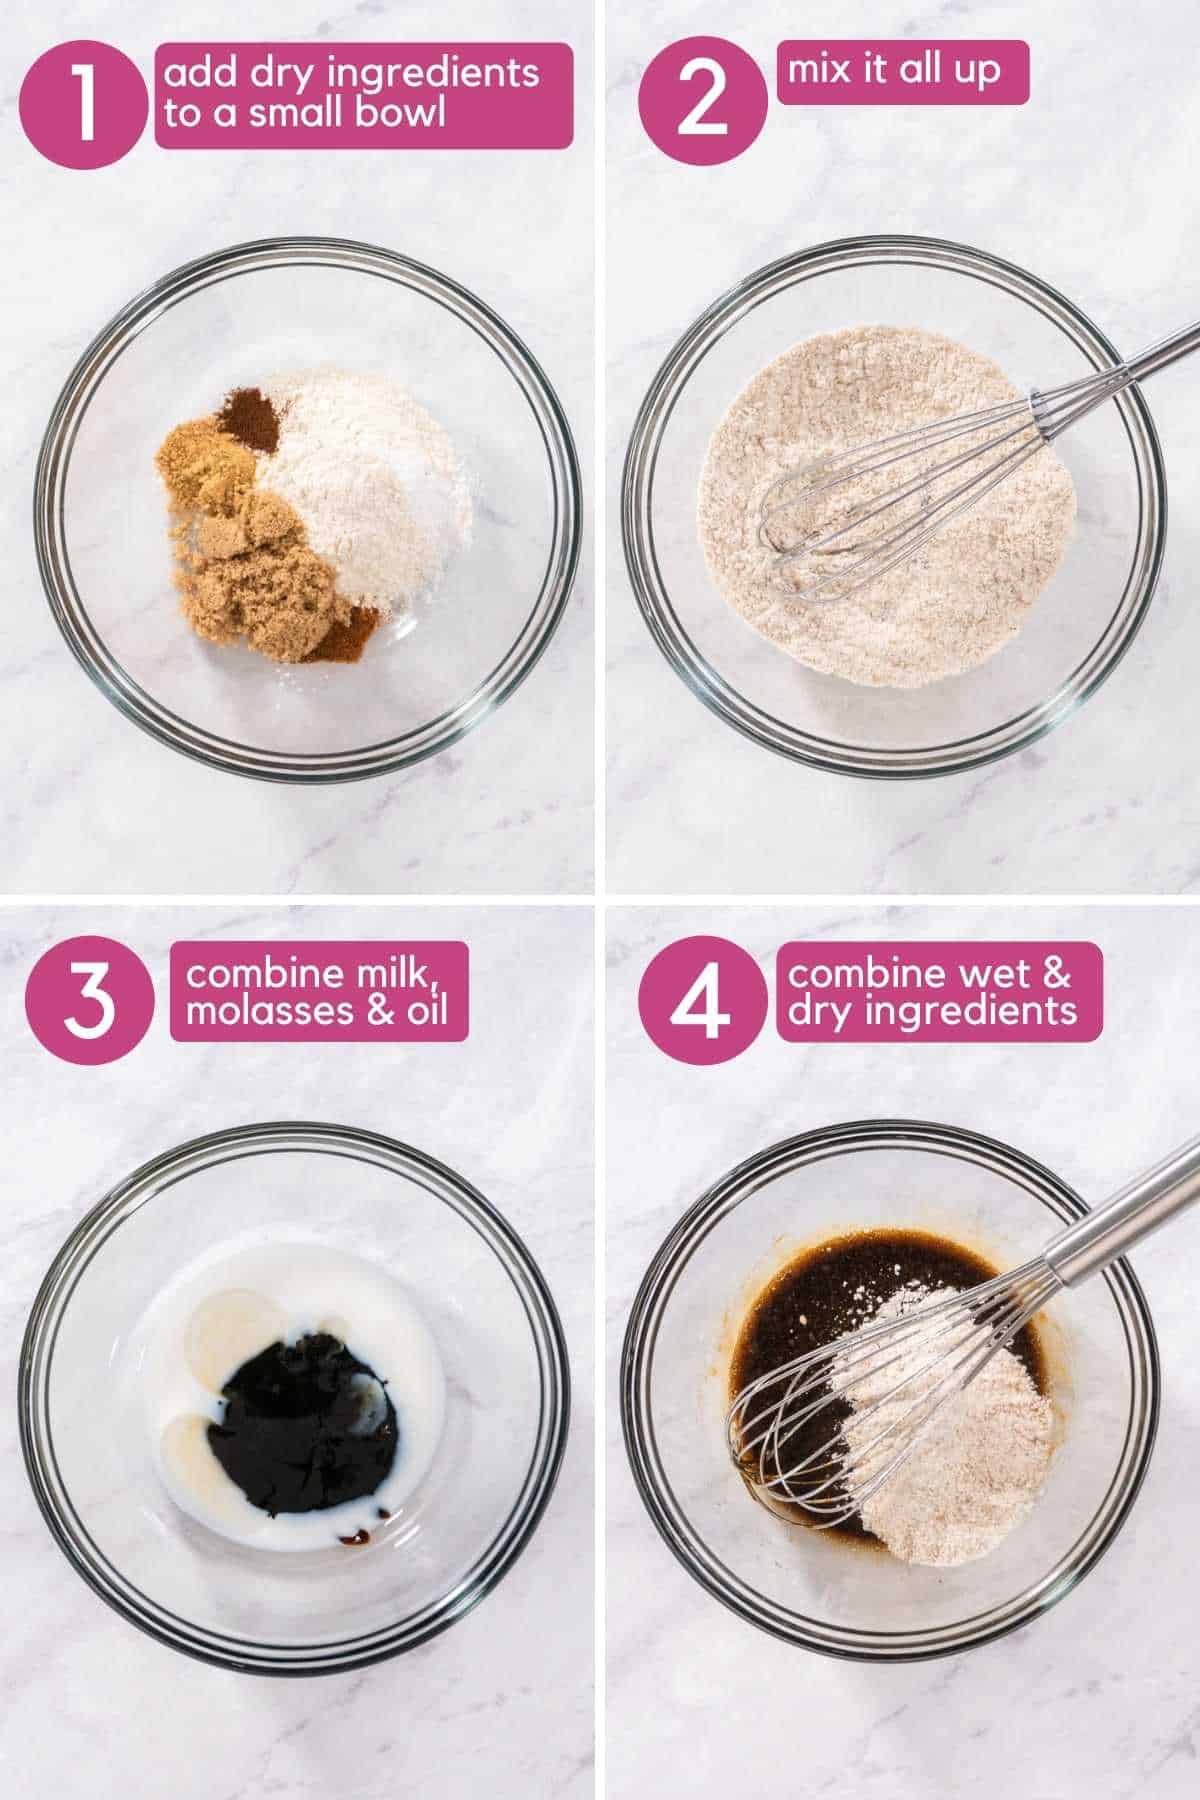 Combine dry ingredients and wet ingredients for gingerbread in a mug.